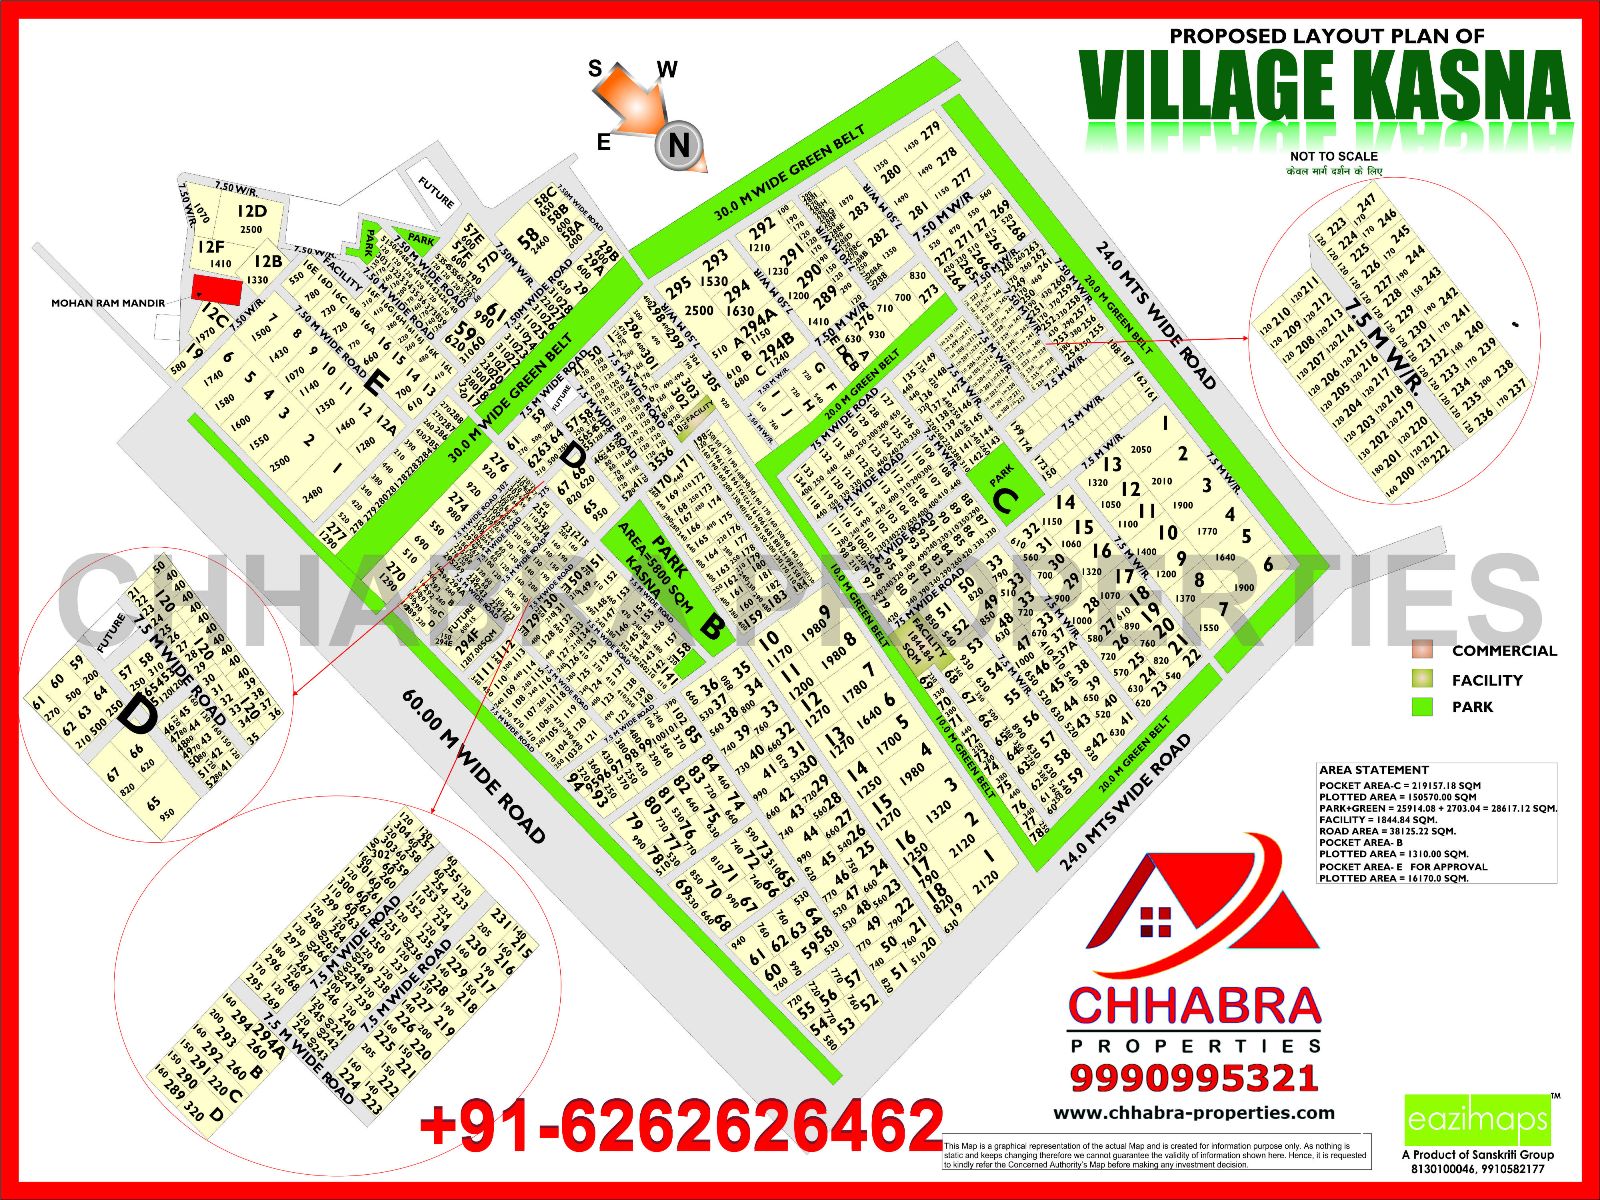 layout plan for village kasna hd map